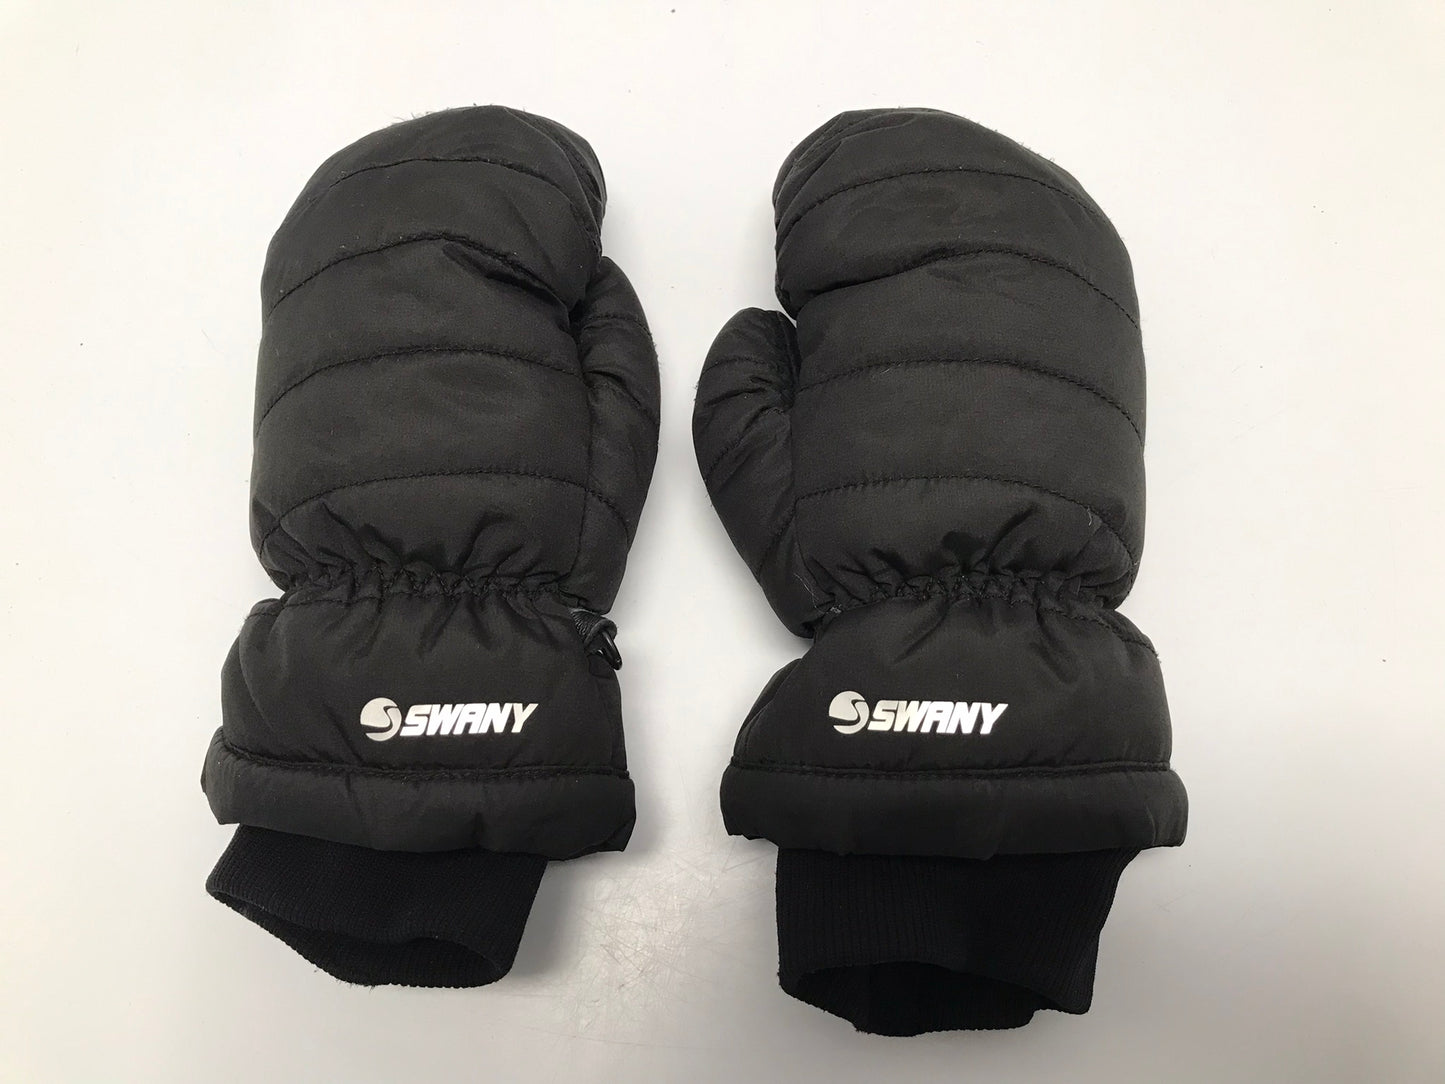 Winter Gloves and Mitts  Ladies Size Small Swany Deep Cold -30 Degree As New Black